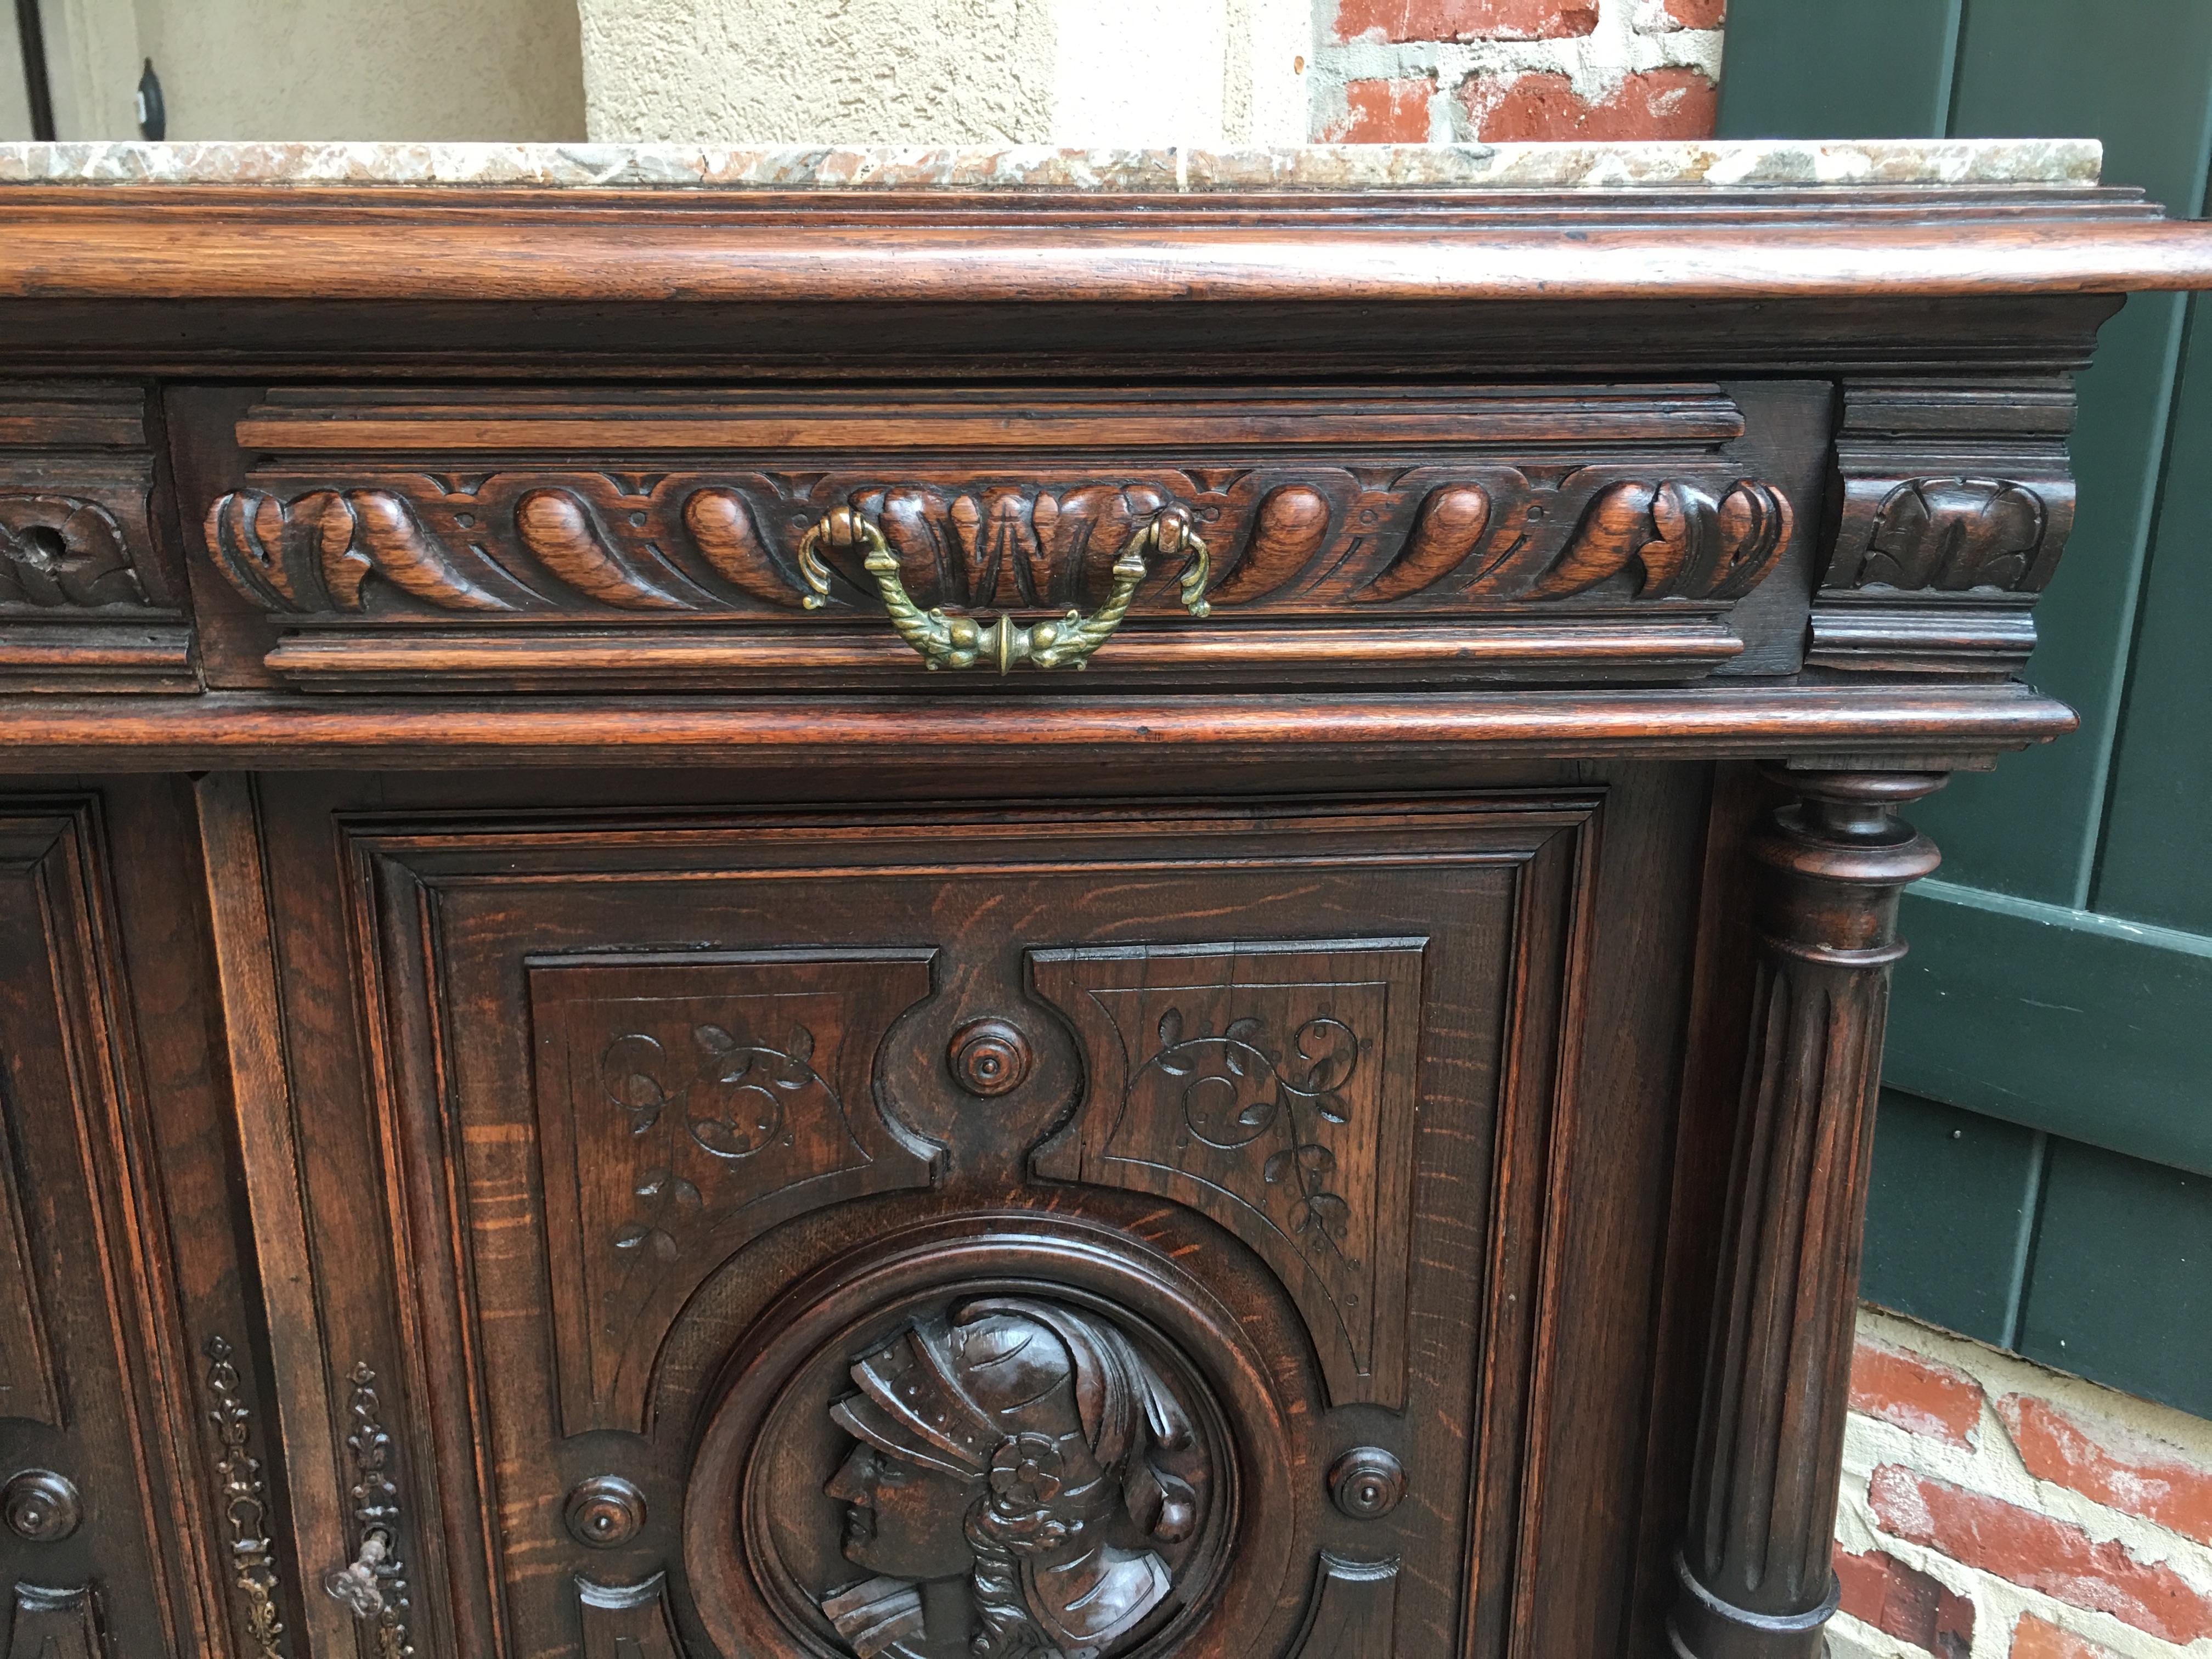 Direct from France, a GREAT size antique French server, with detailed carvings and a marble top, this piece could be placed in SO many different areas from foyer to dining to family room or bedroom!~
~Double “drawers over doors”, the perfect